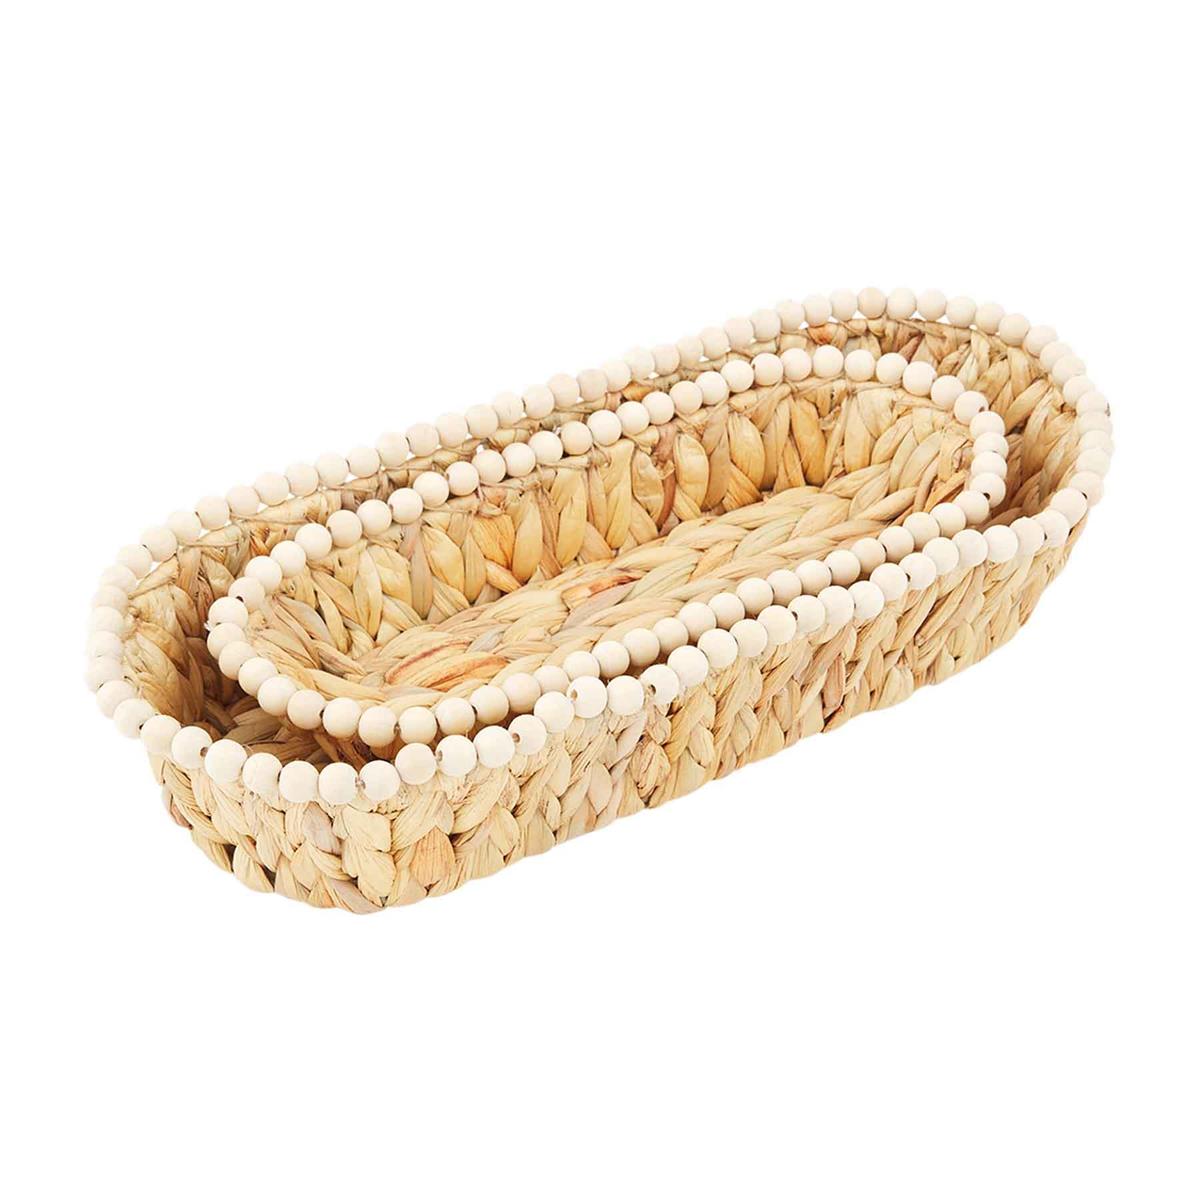 both sizes of stacked hyacinth beaded bread basket on a white background